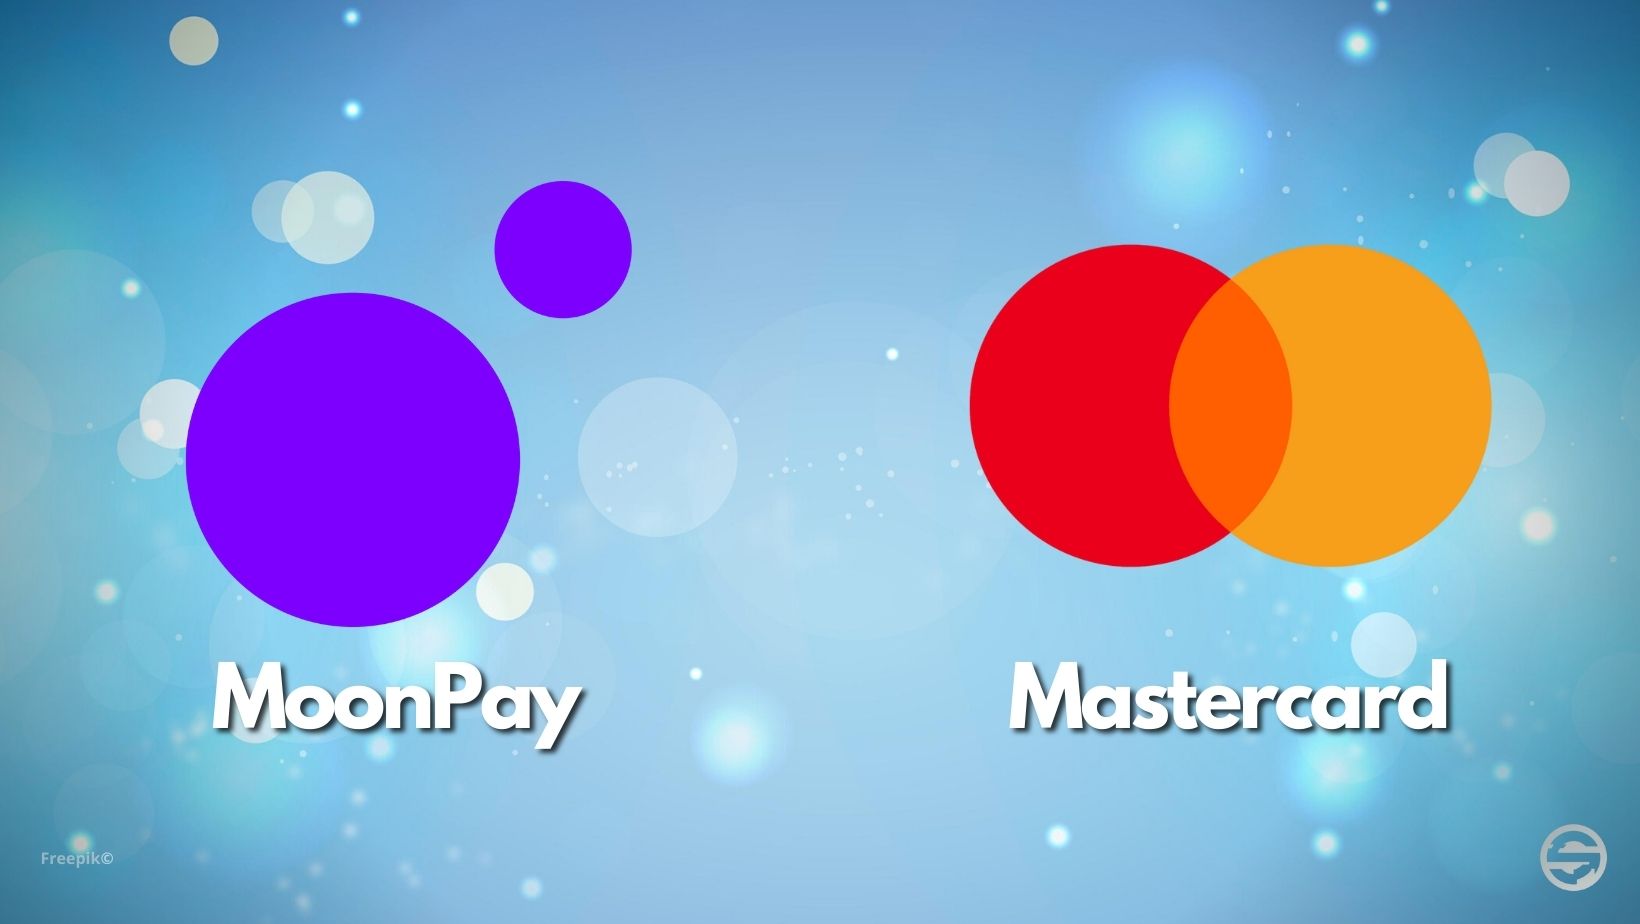 MoonPay and Mastercard partner to take advantage of new Web3 technologies